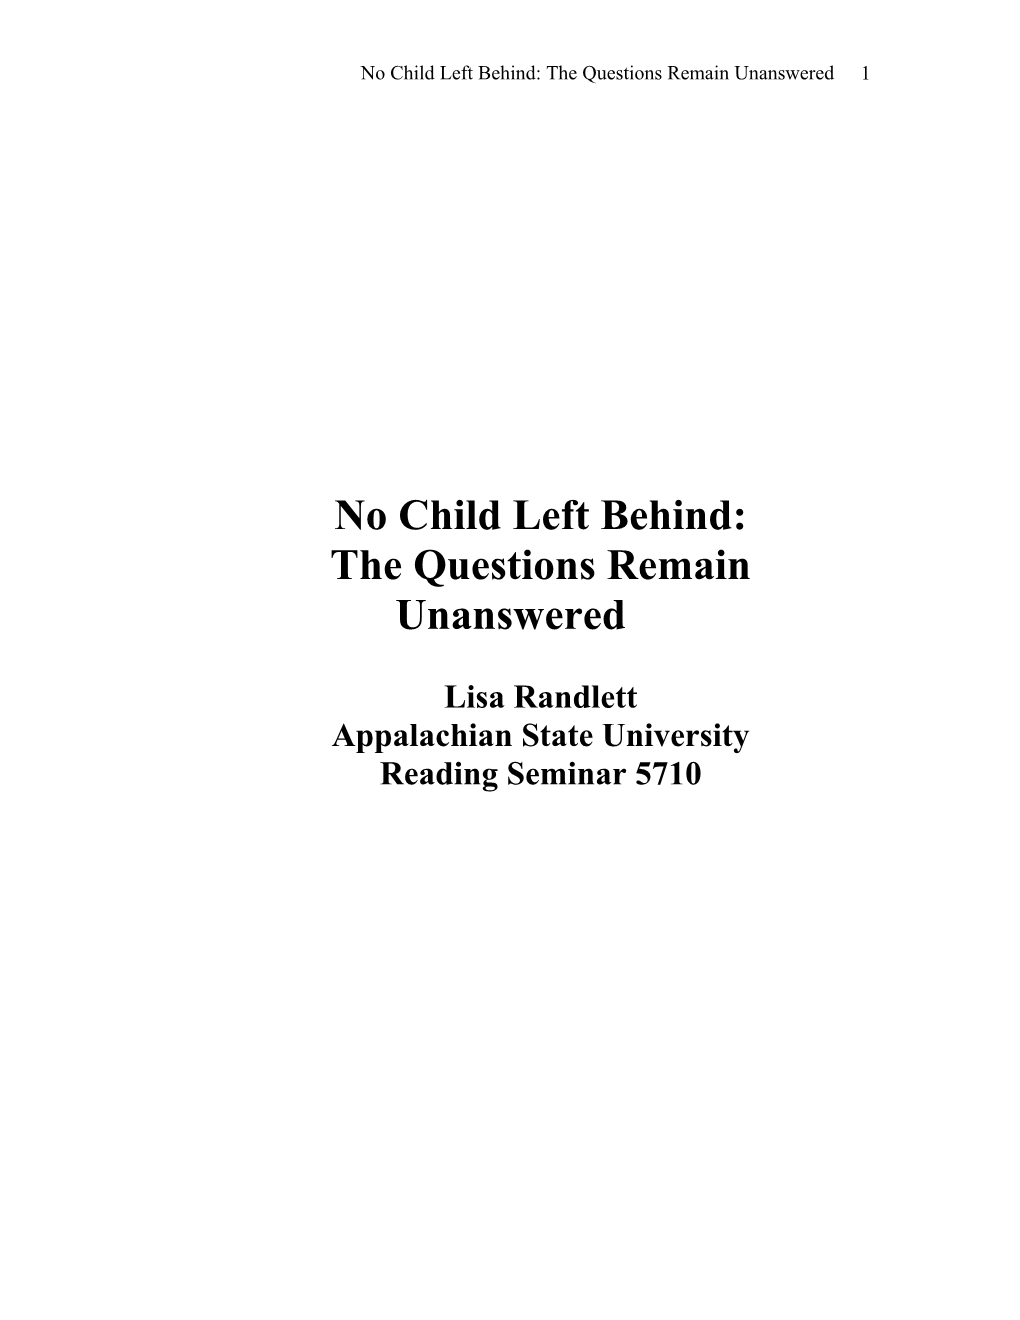 The No Child Left Behind (NCLB) Act Is a Reauthorization of the Elementary and Secondary